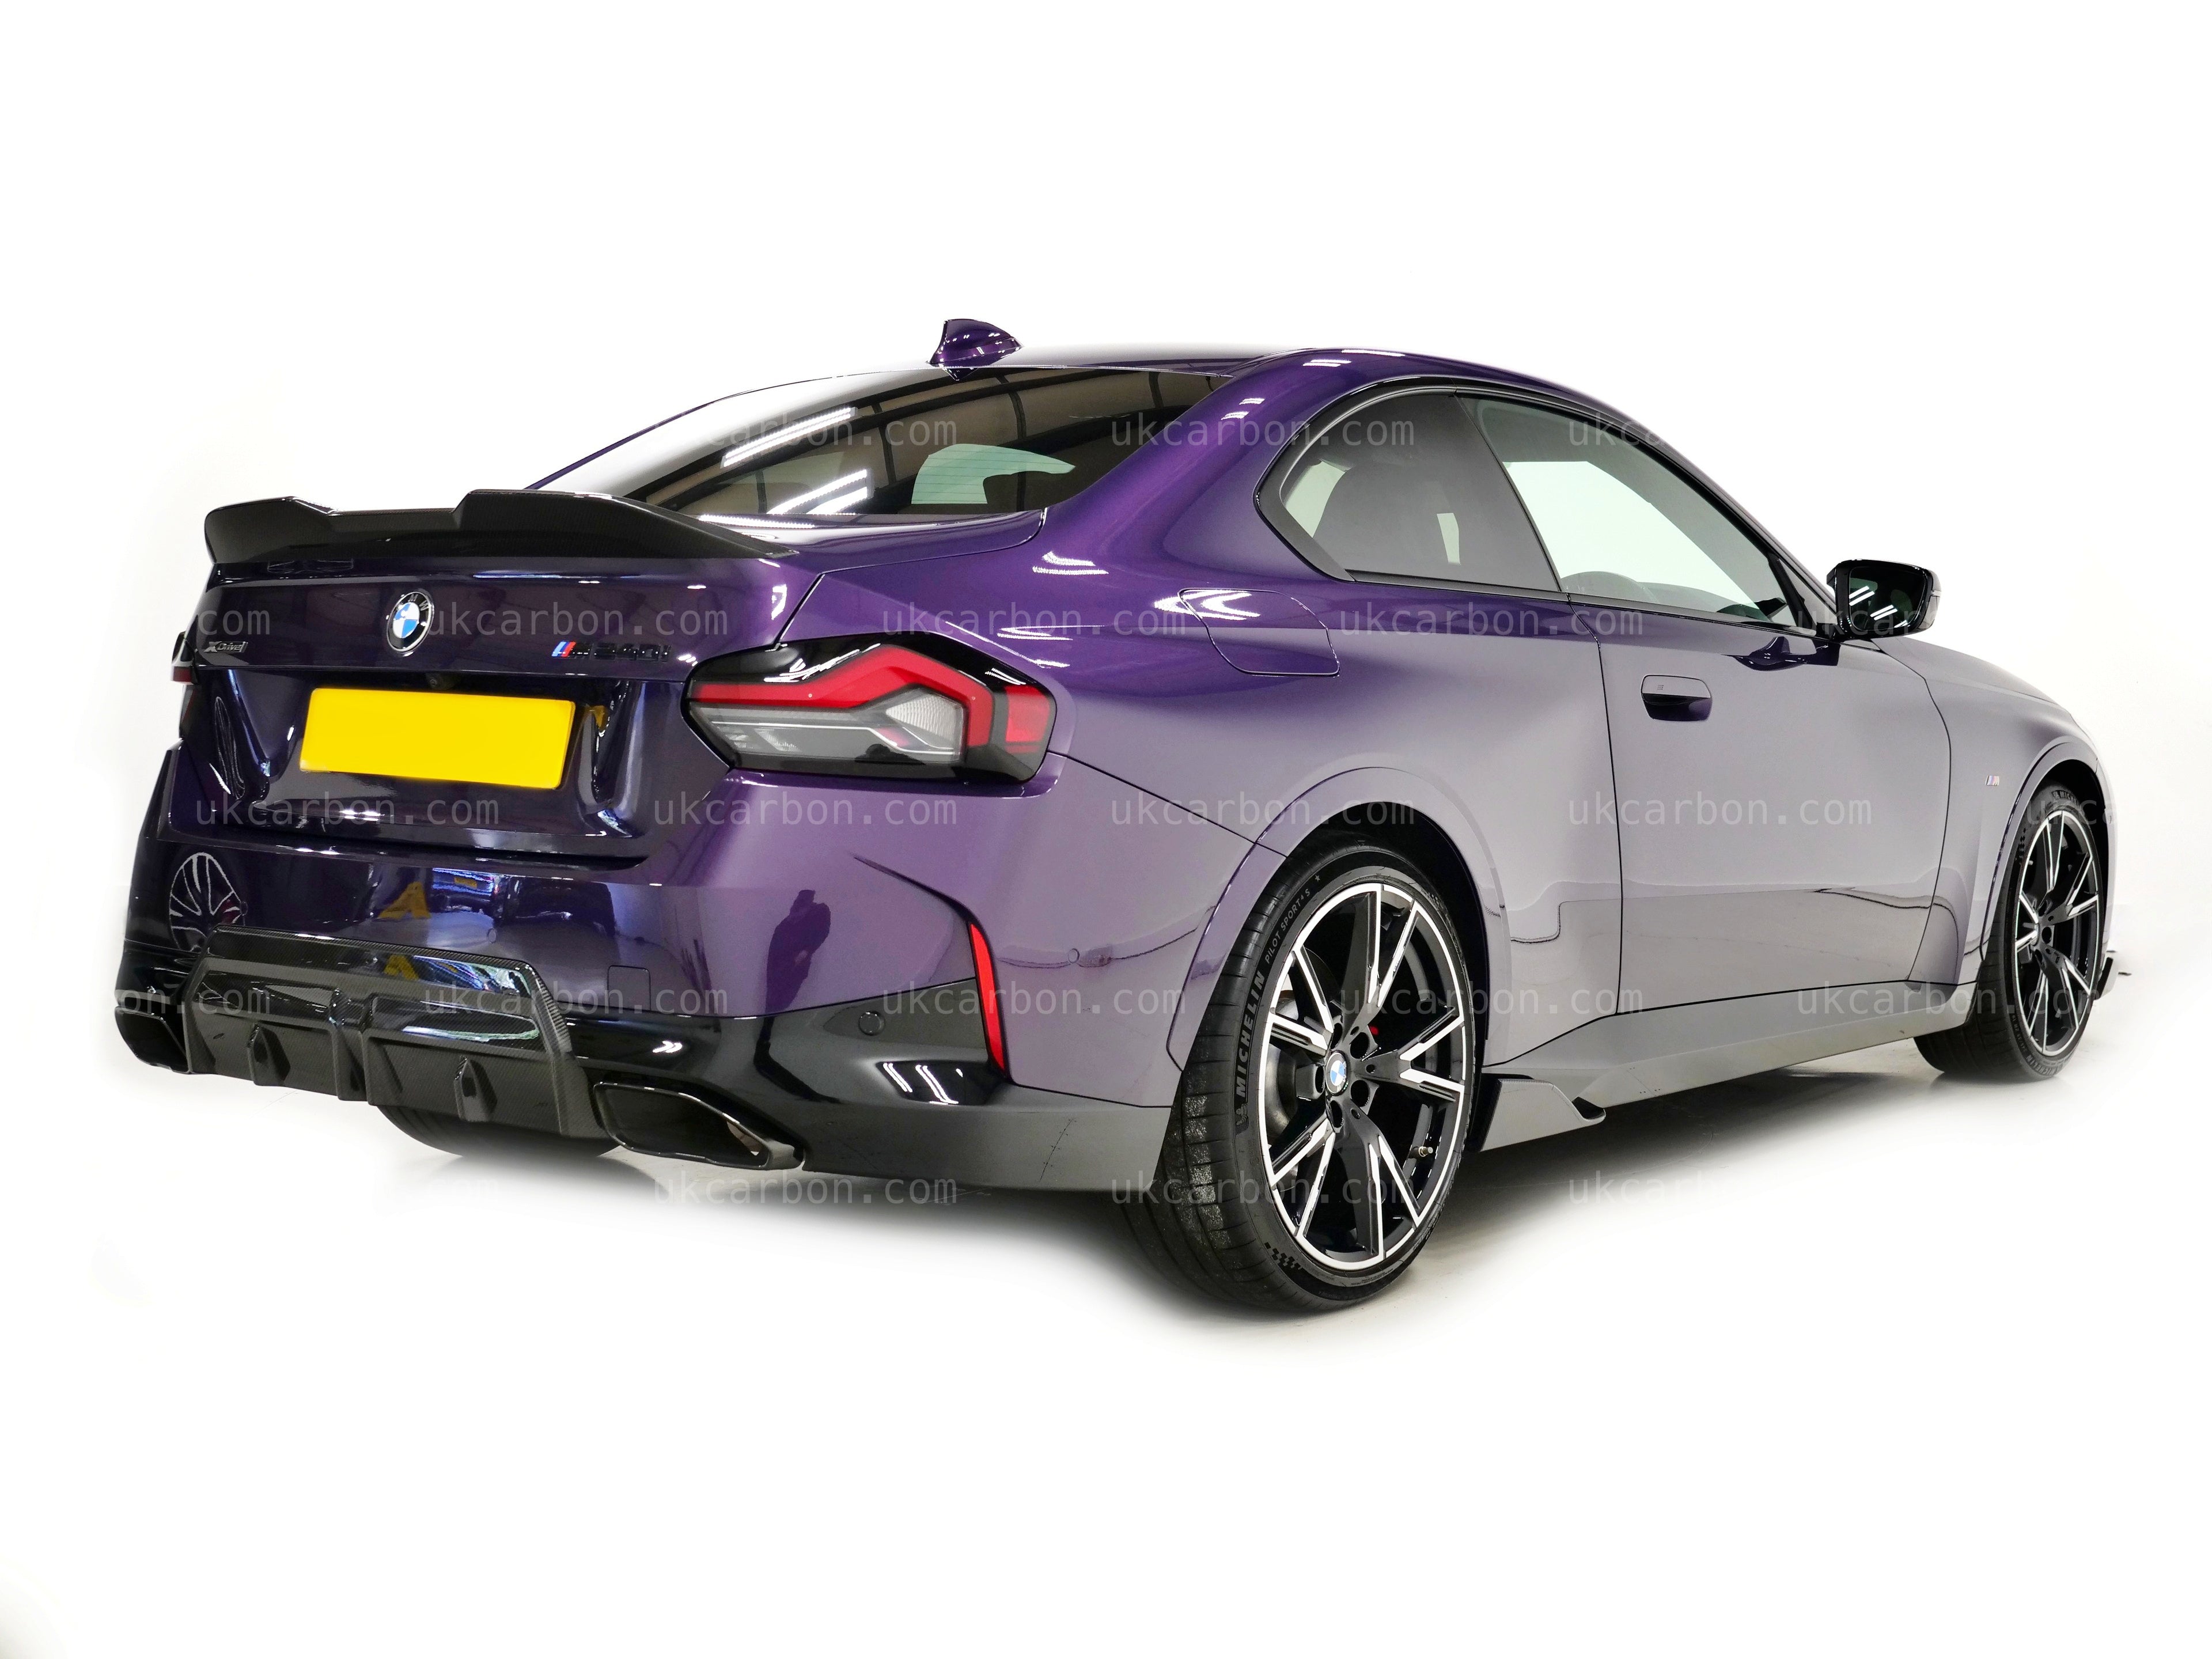 BMW 2 Series M240i Diffuser G42 Coupe Carbon Fibre Rear Body Kit by UKCarbon